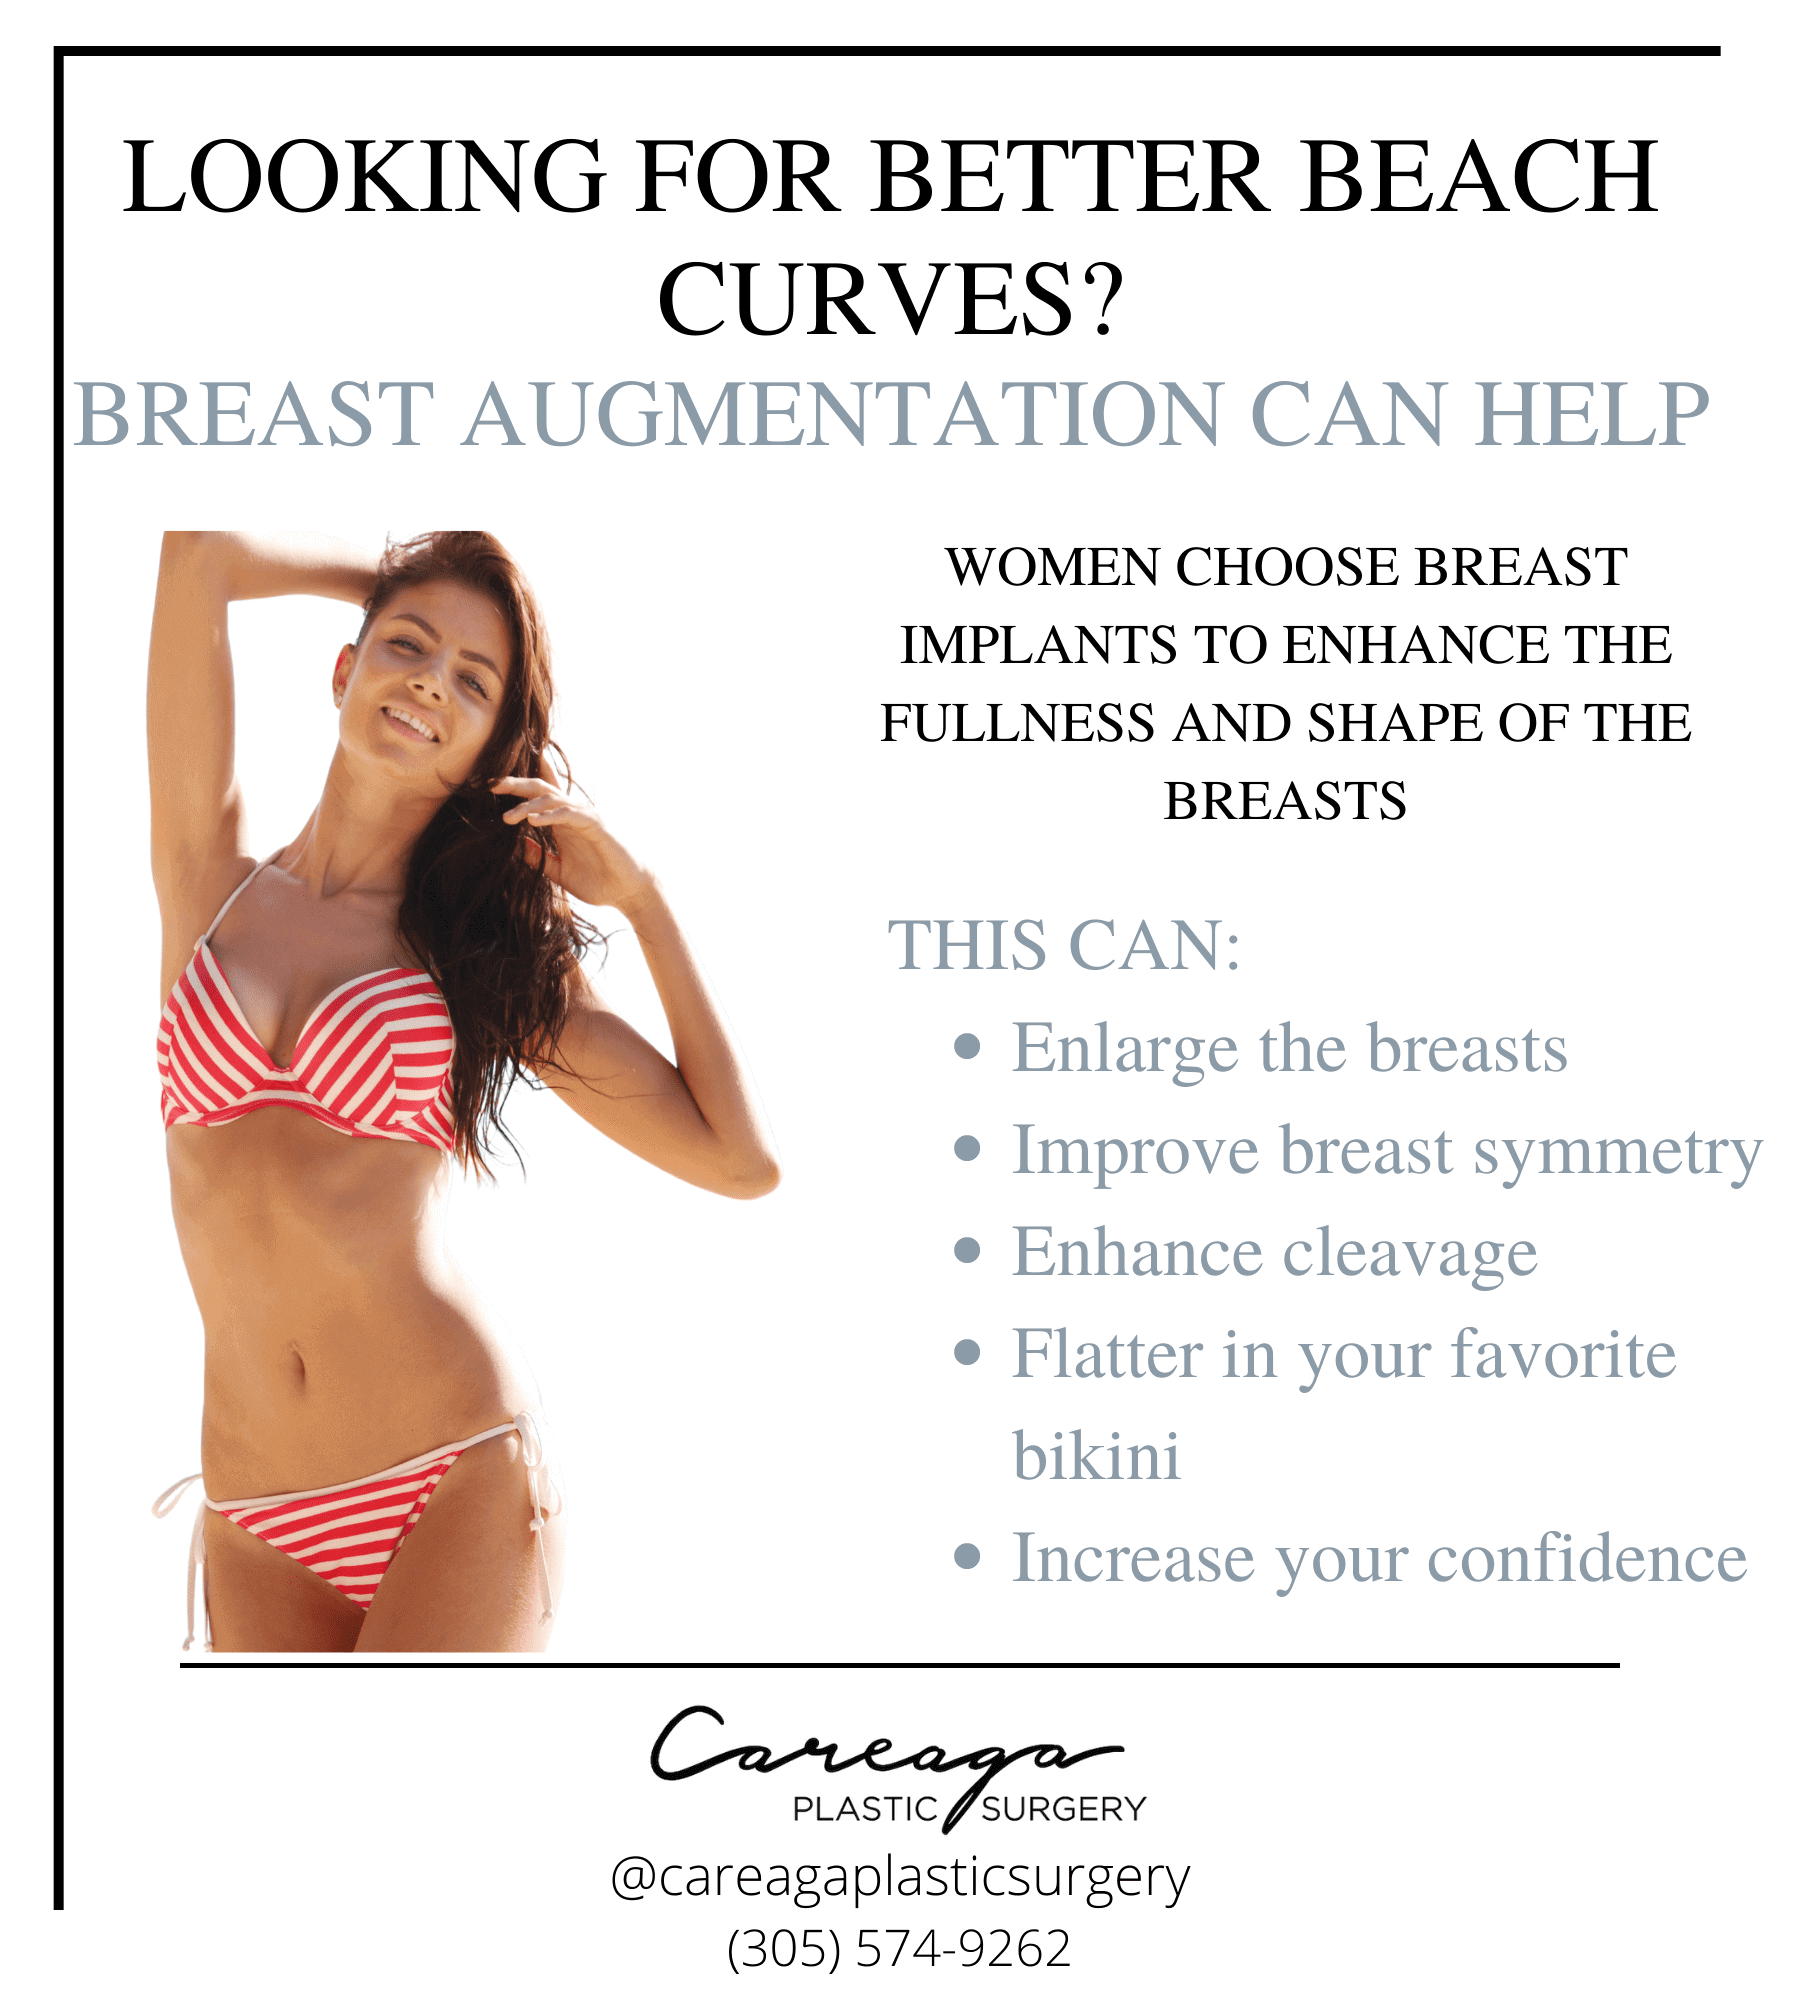 Infographic showing the benefits of breast augmentation.